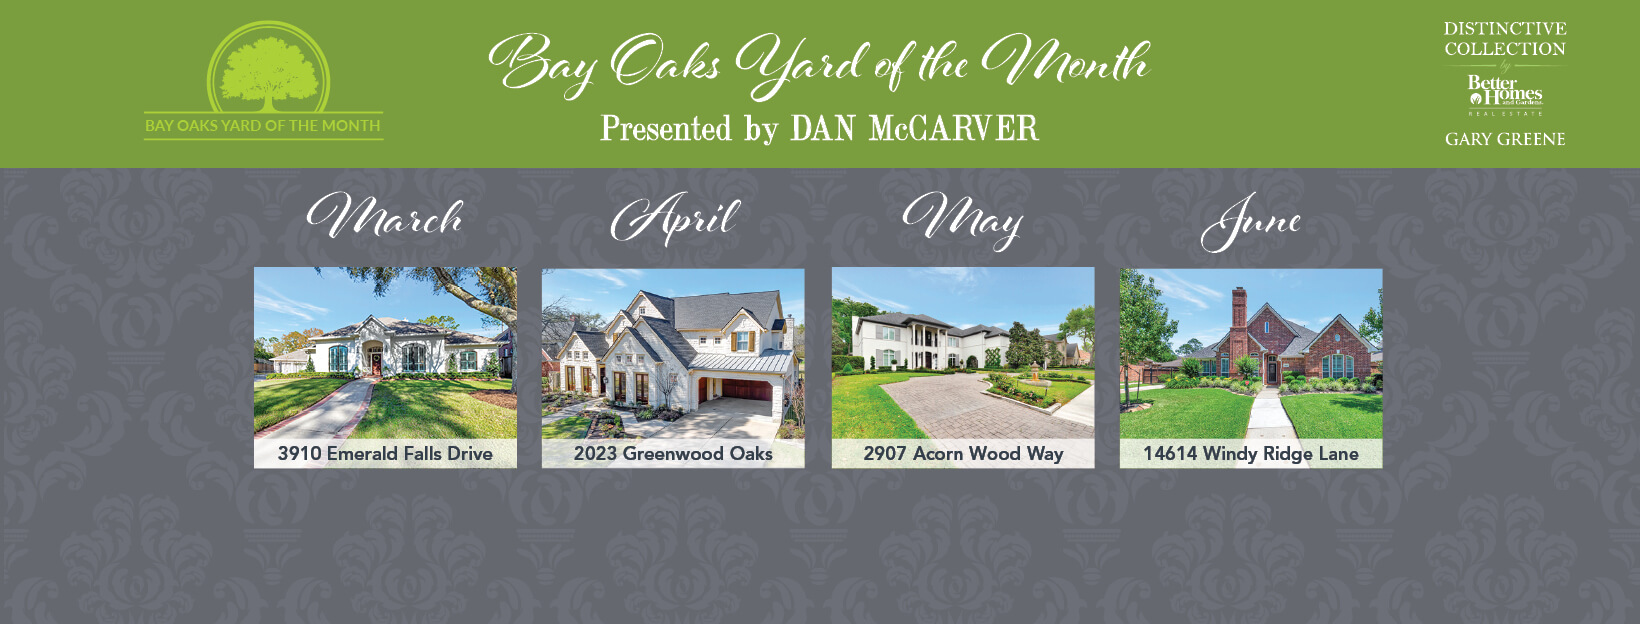 Bay Oaks Yard of the Month June 2022